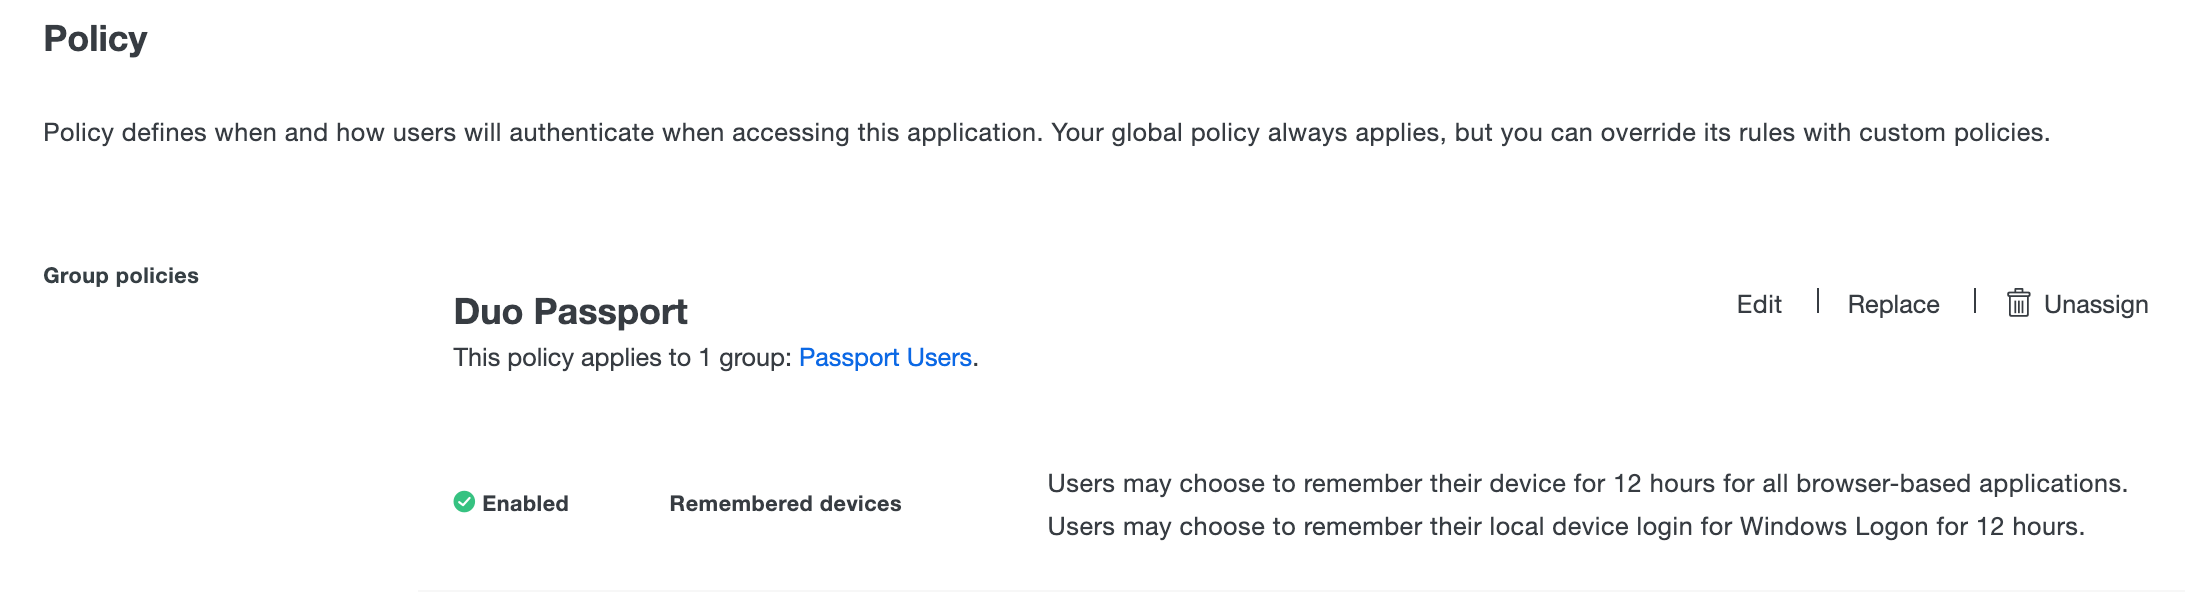 Duo Passport Group Policy Applied to Pilot Group